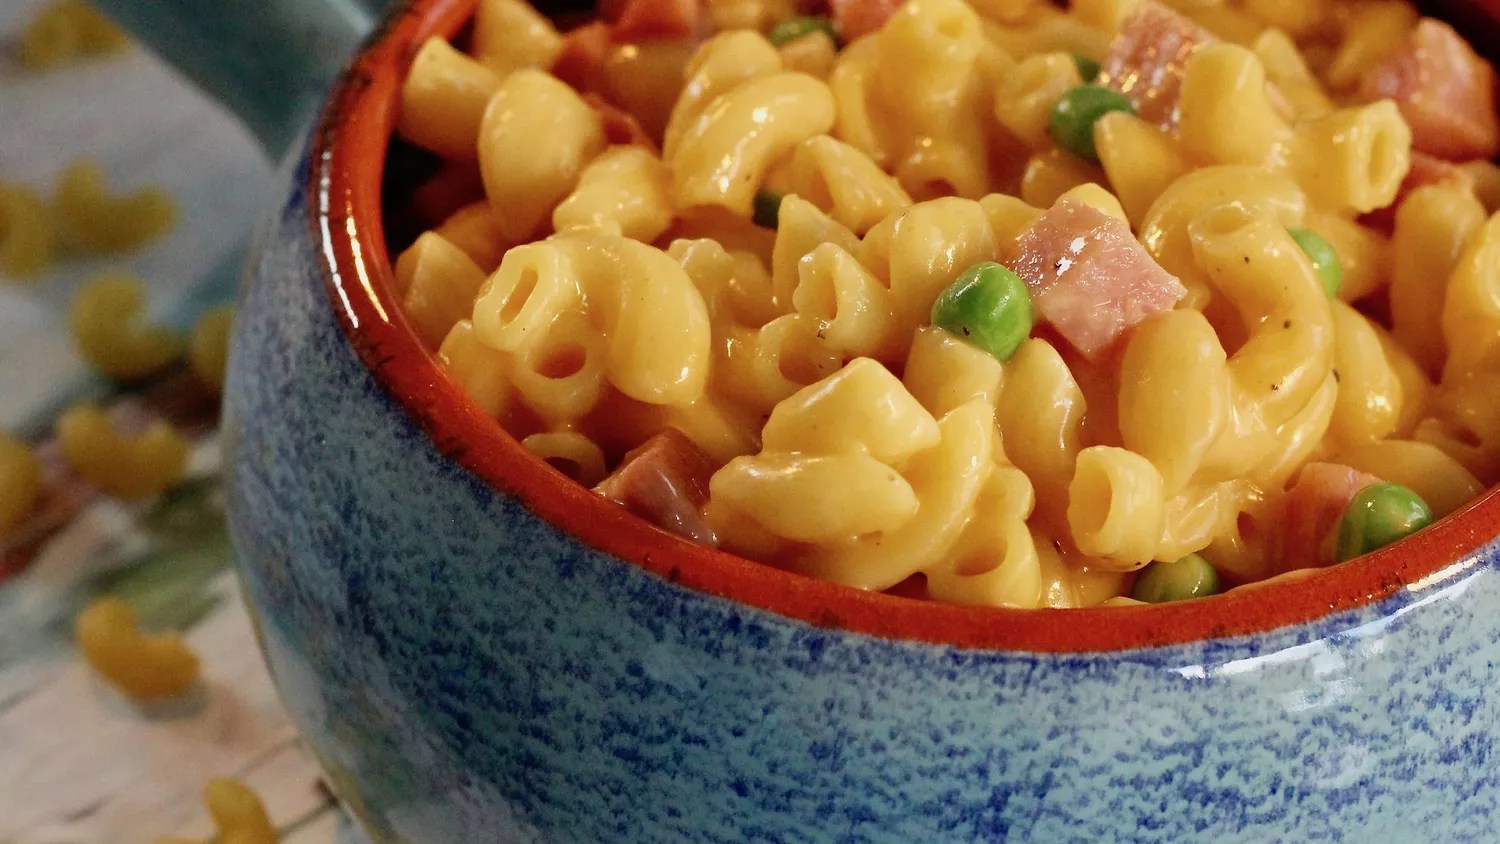 Mouthwatering Mac and Cheese: Creamy, Cheesy, and